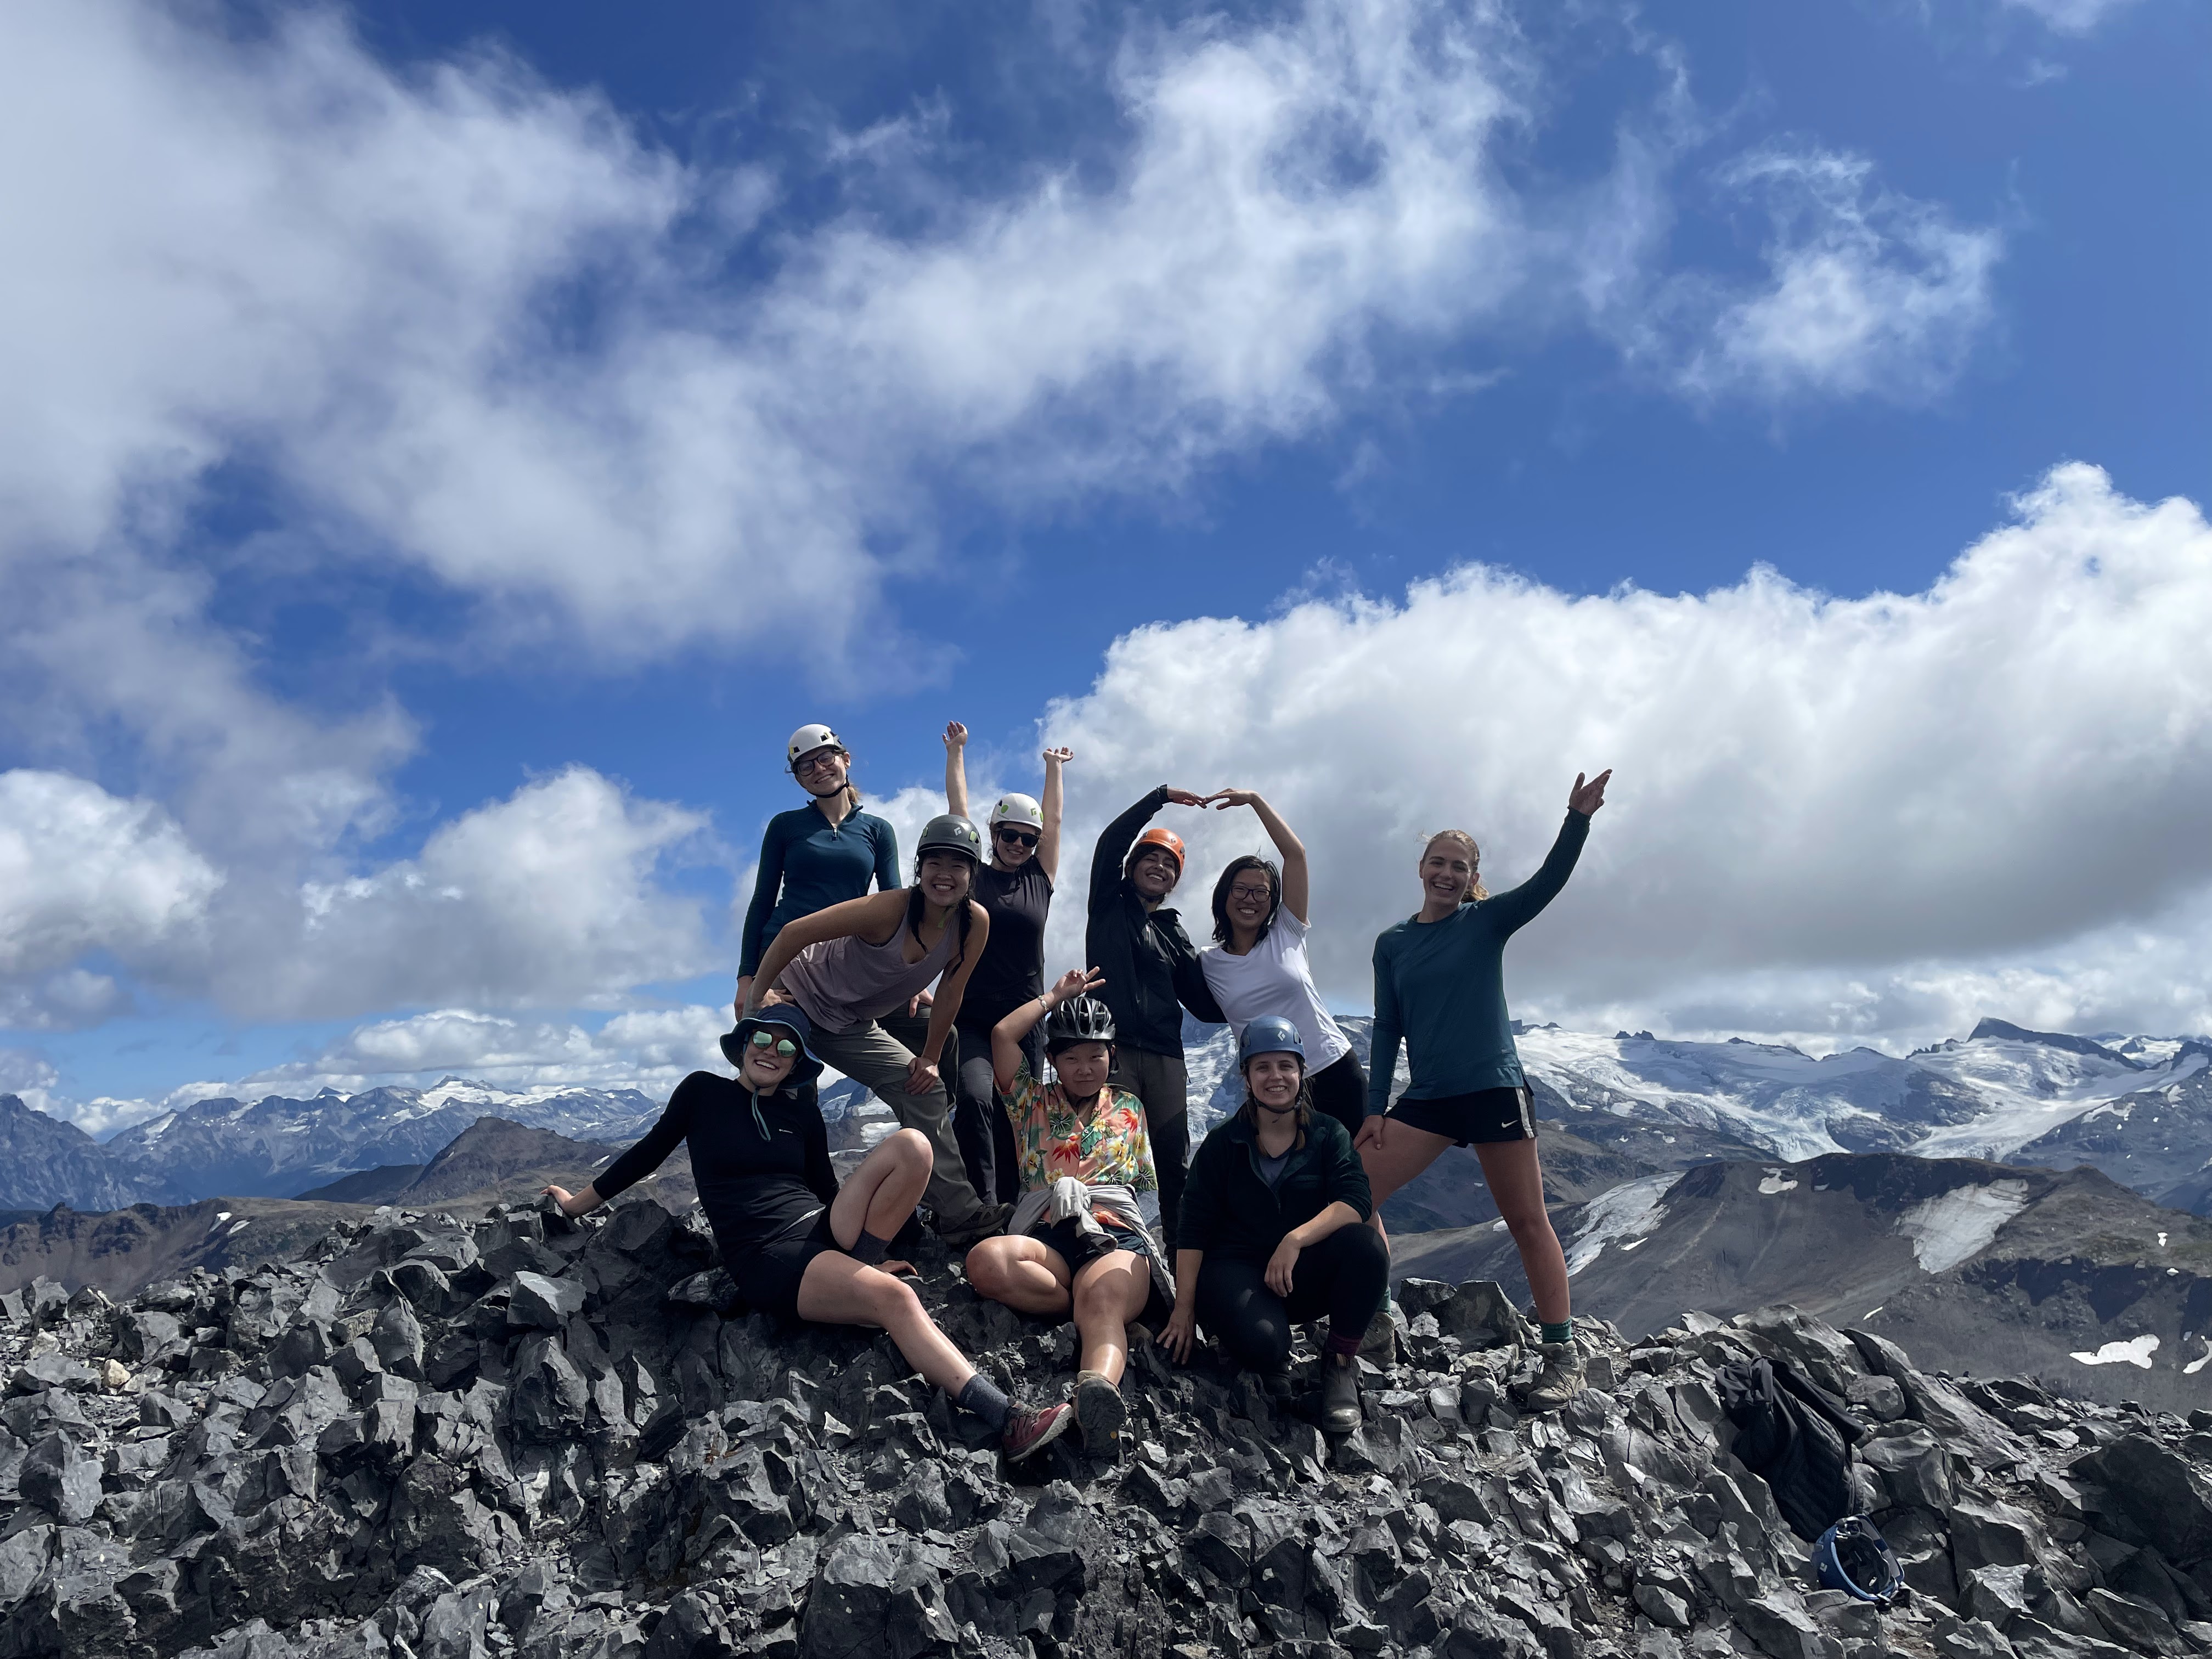 Group photo at the top of Black Tusk